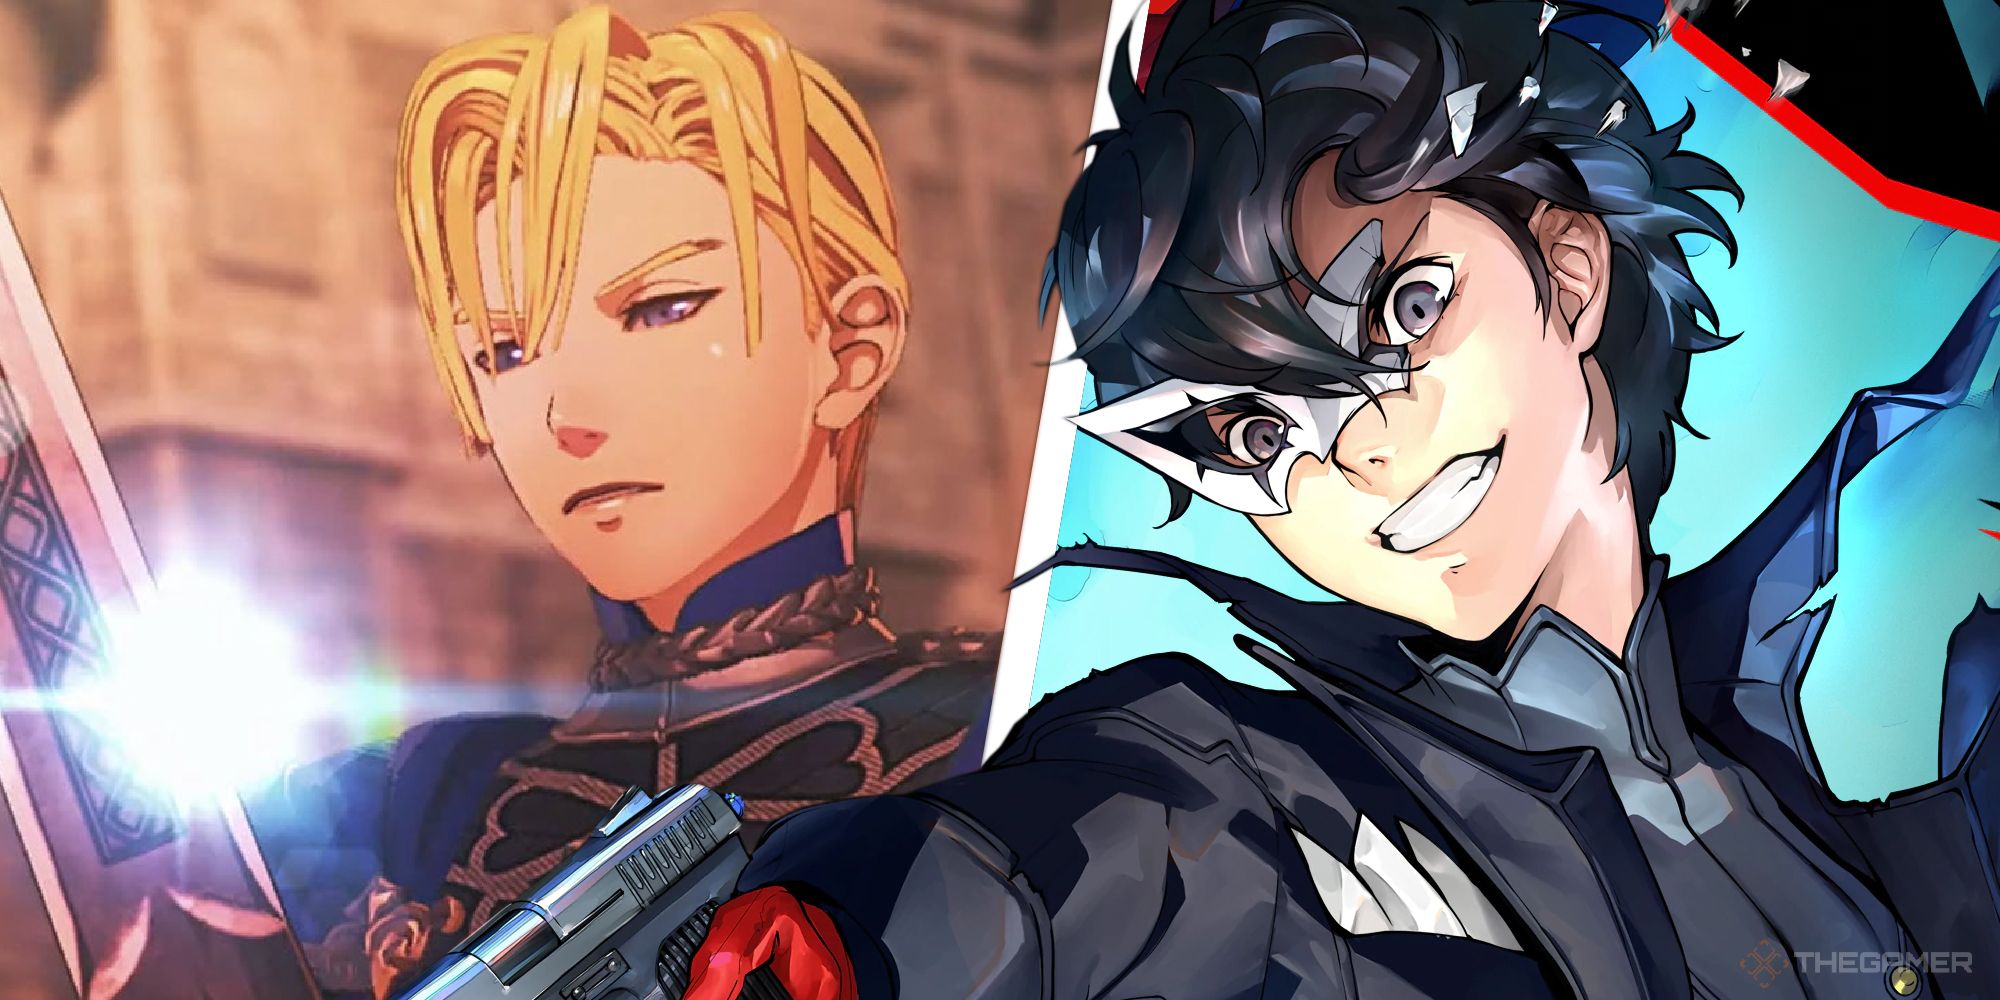 Dimitri from Fire Emblem Warriors 3 Hopes and Joker from Persona 5 Strikers